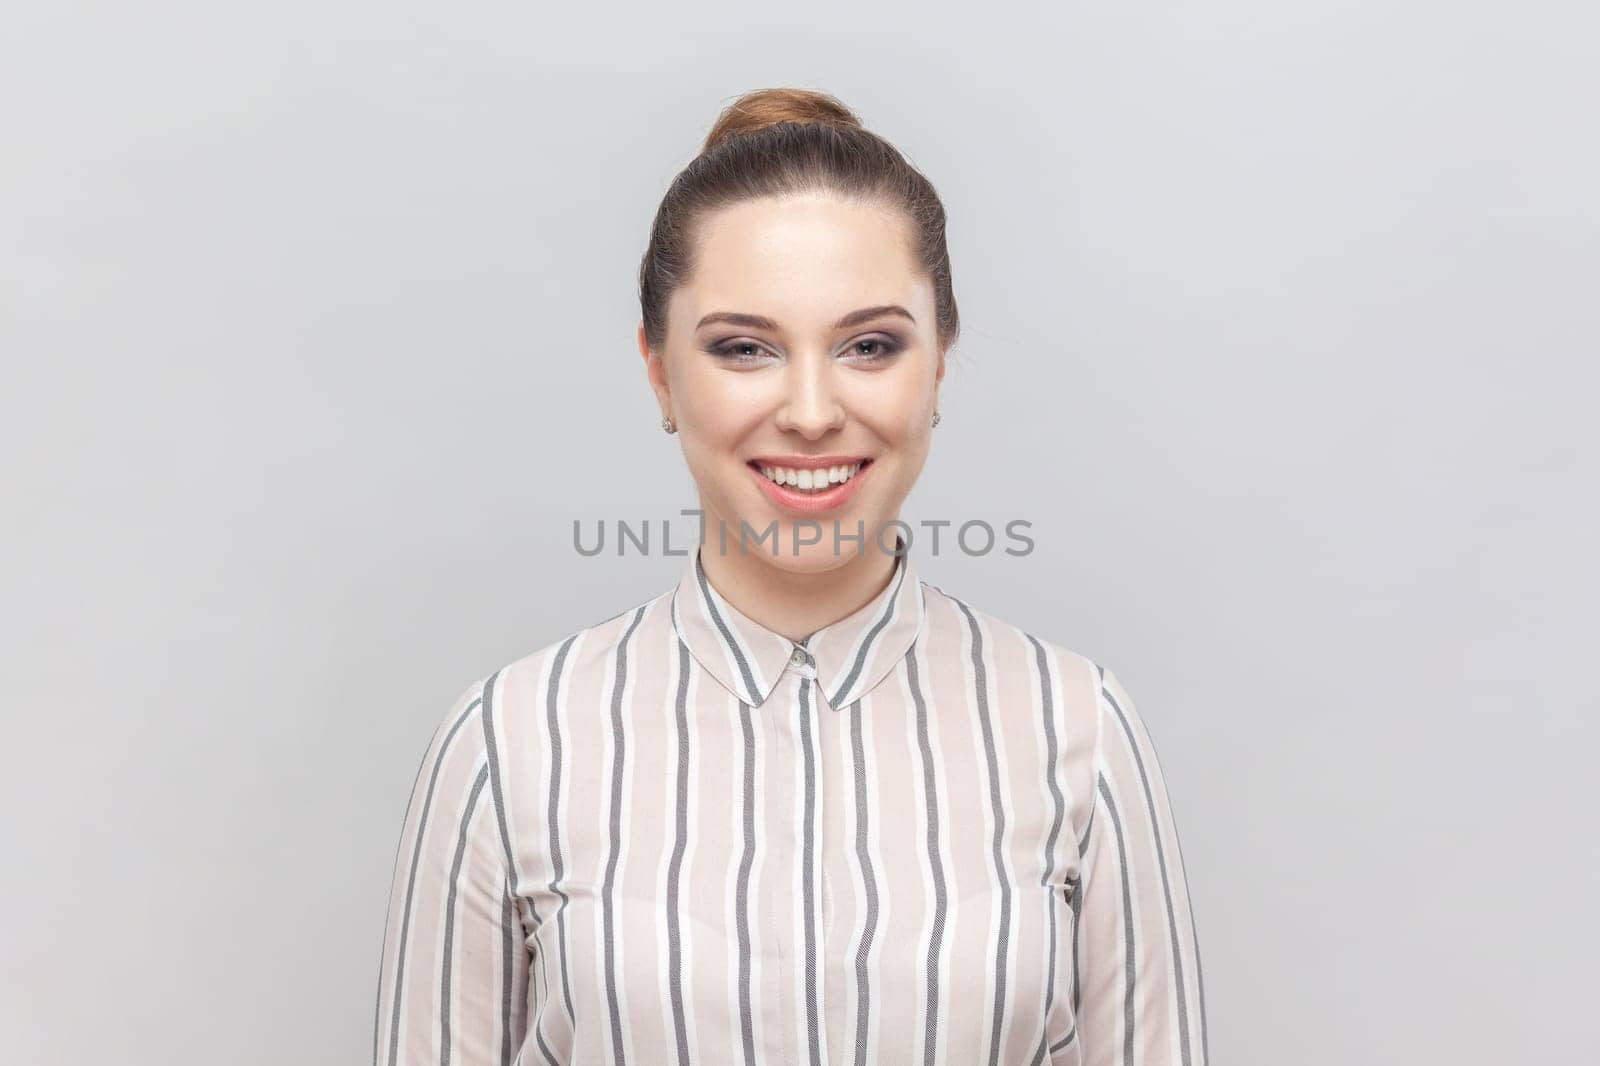 Portrait of attractive joyful cheerful woman wearing striped shirt looking at camera with toothy smile, being in good mood, expressing positiveness. Indoor studio shot isolated on gray background.